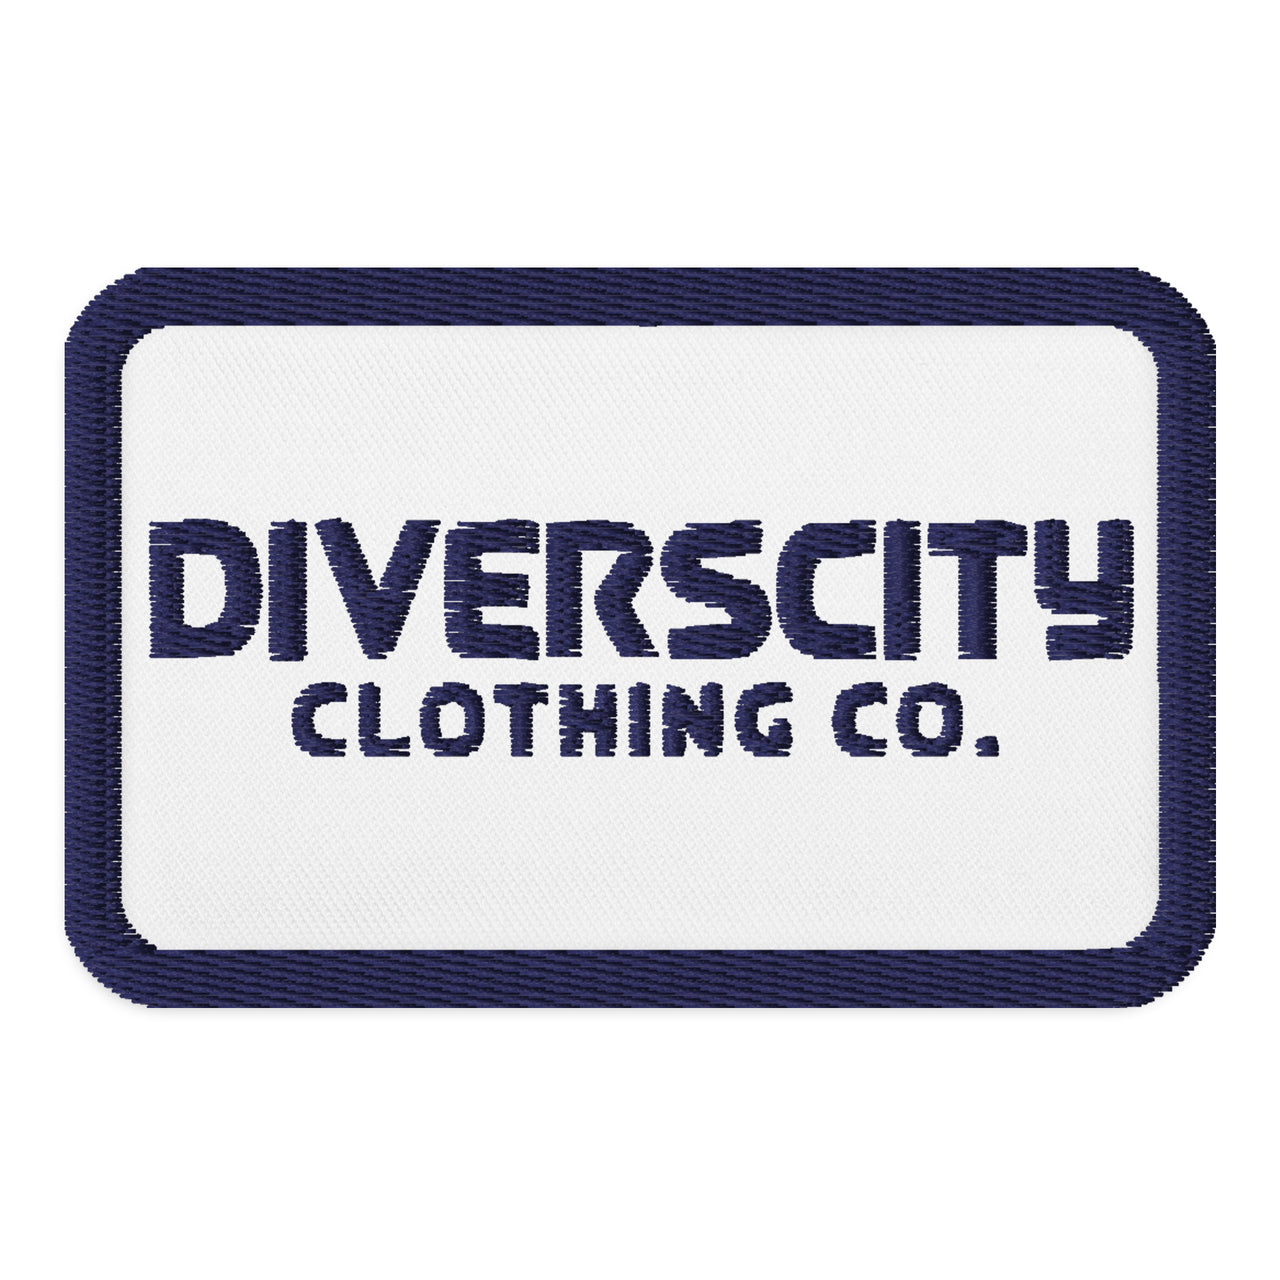 Diverscity Clothing Co. Embroidered Patch